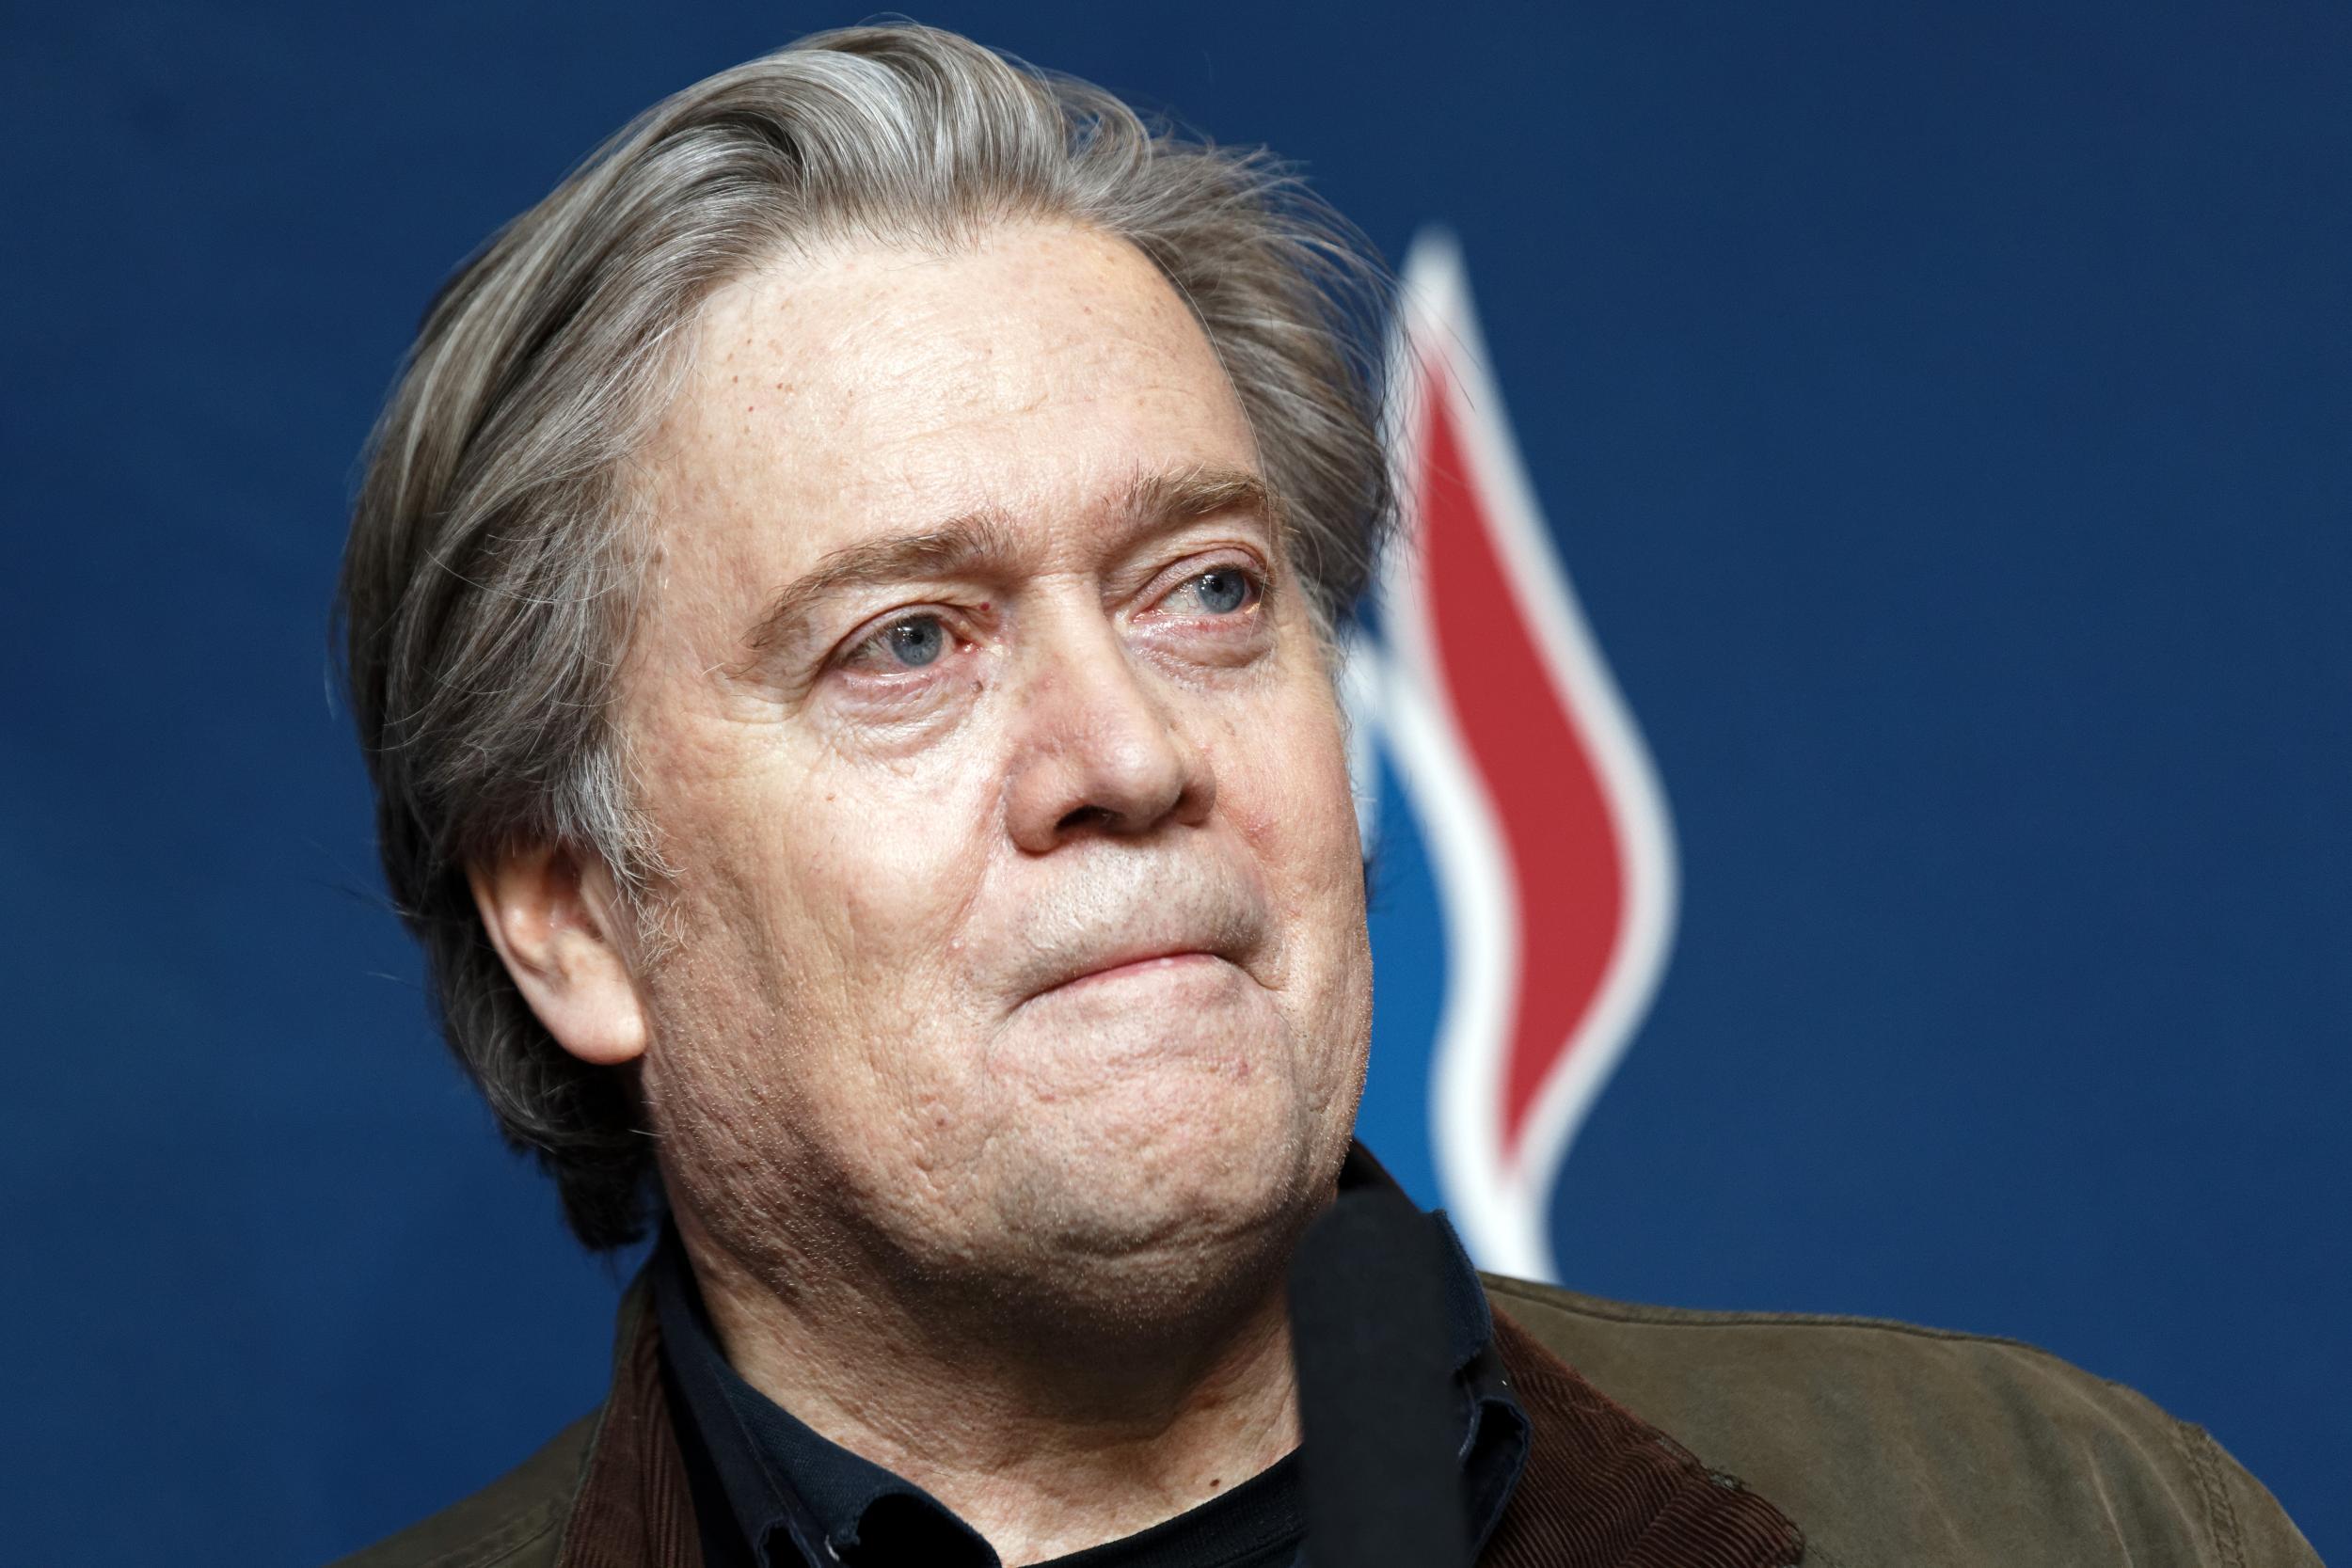 Steve Bannon went from being vice-president of Cambridge Analytica to chief strategist for Donald Trump